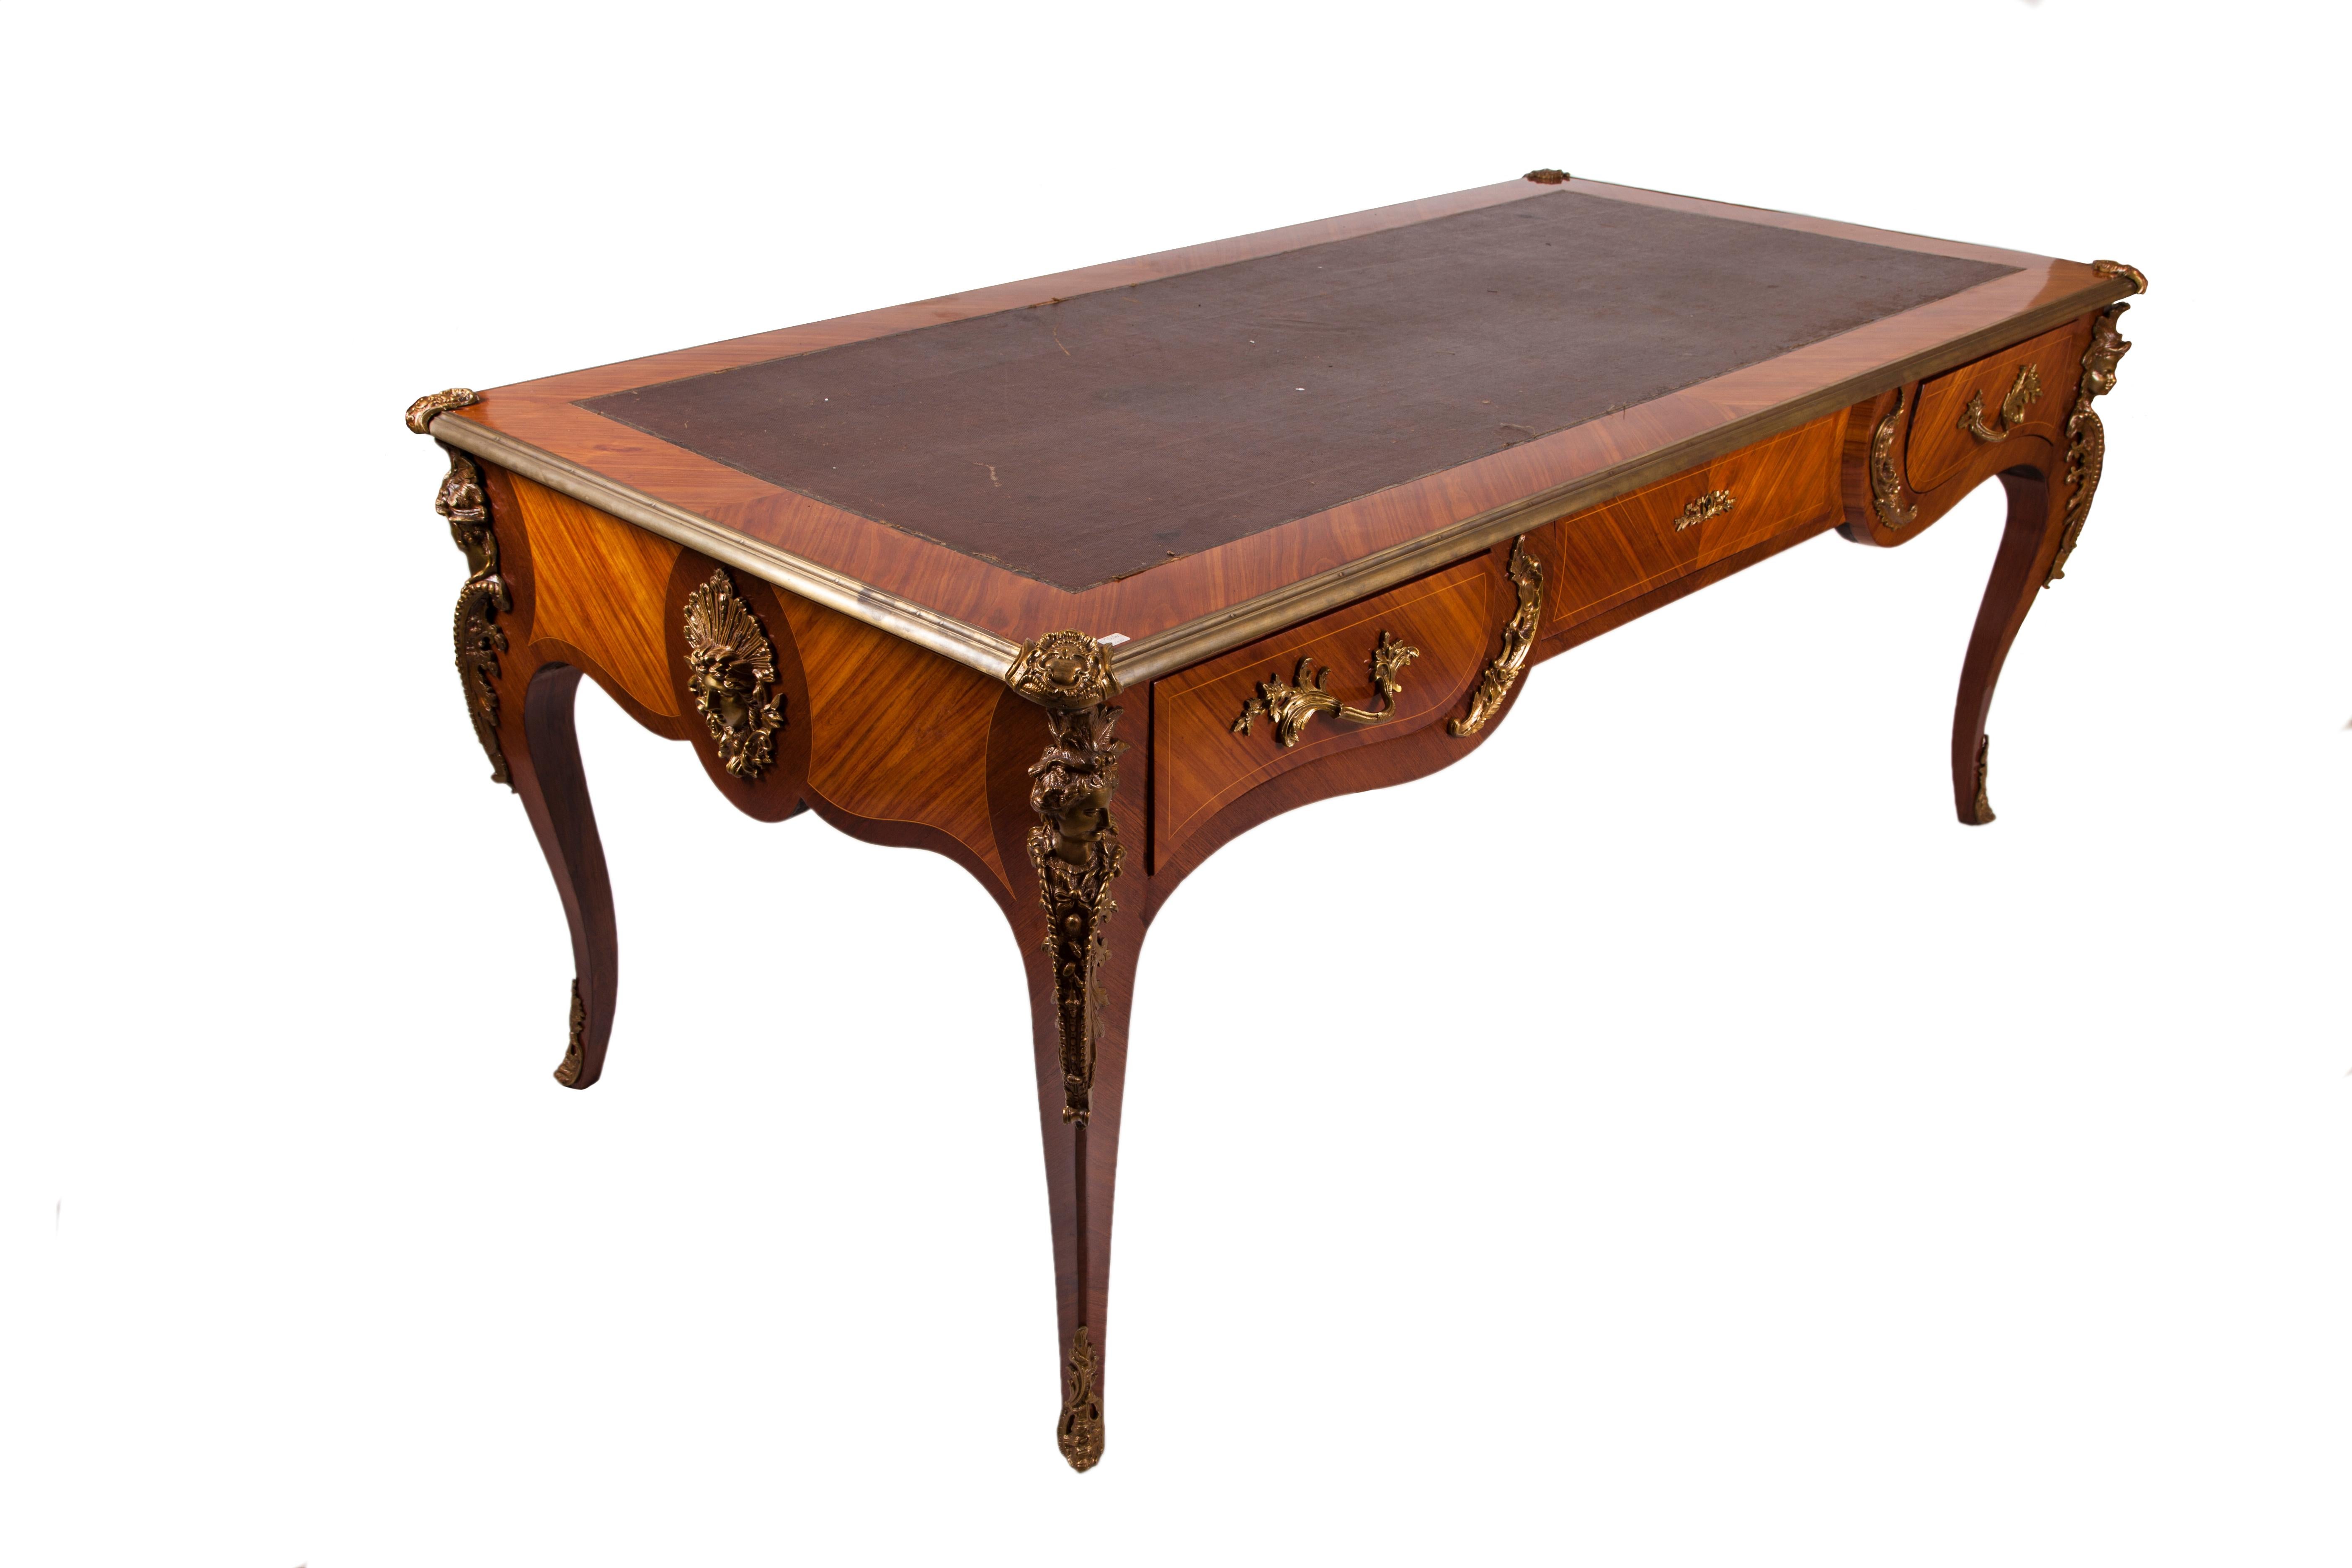 Large and important 19th century French desk in kingwood and rosewood, Louis XV style. It can be used on both sides and it has three drawers on each front. Top in brown leather with some signs of wear. Beautiful frames in gilded bronze. Busts of